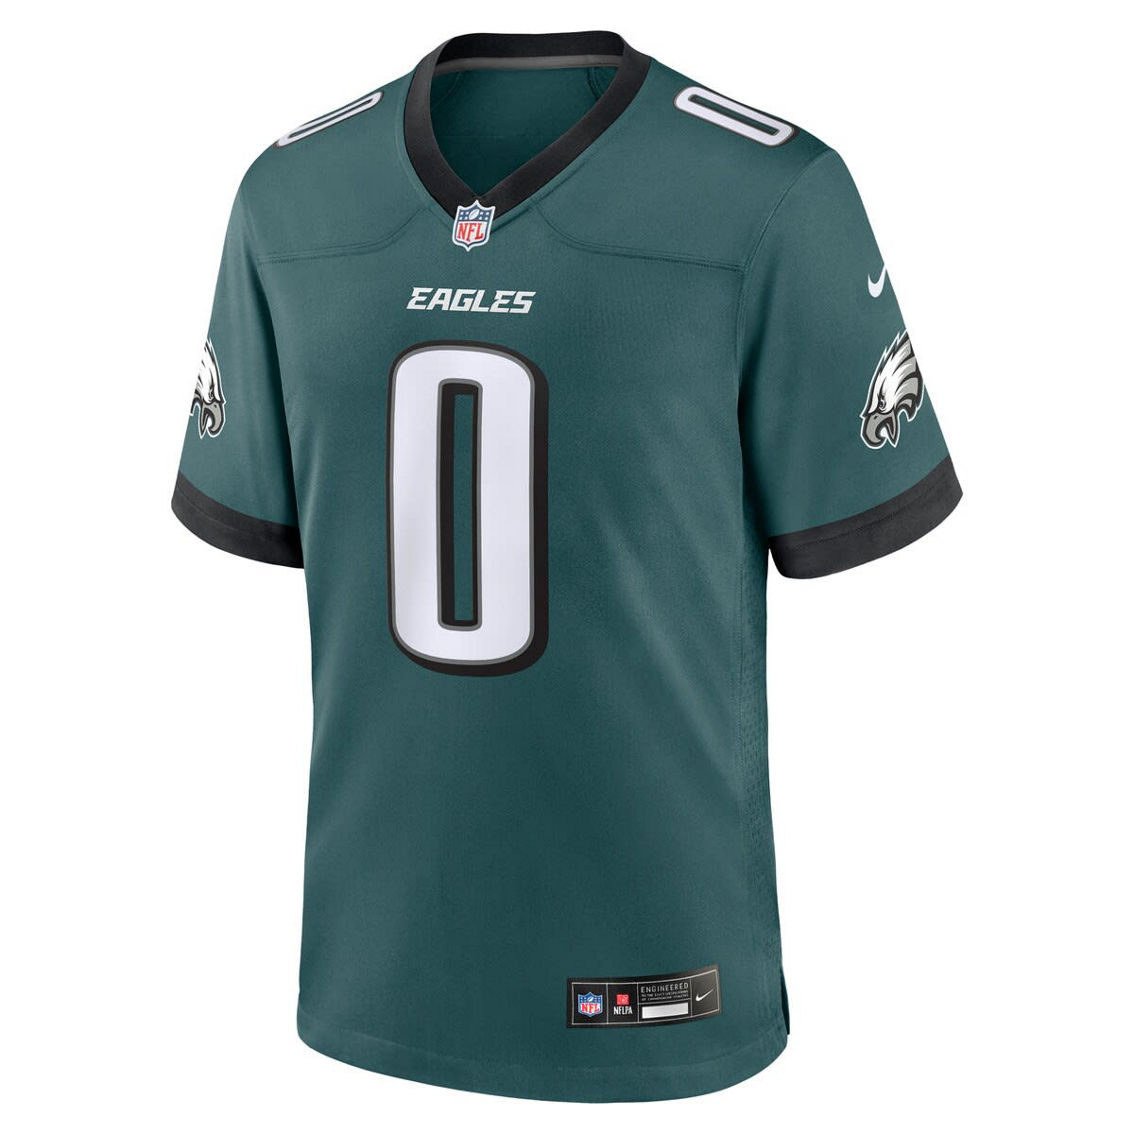 Nike Men's Bryce Huff Midnight Green Philadelphia Eagles Game Player Jersey - Image 3 of 4